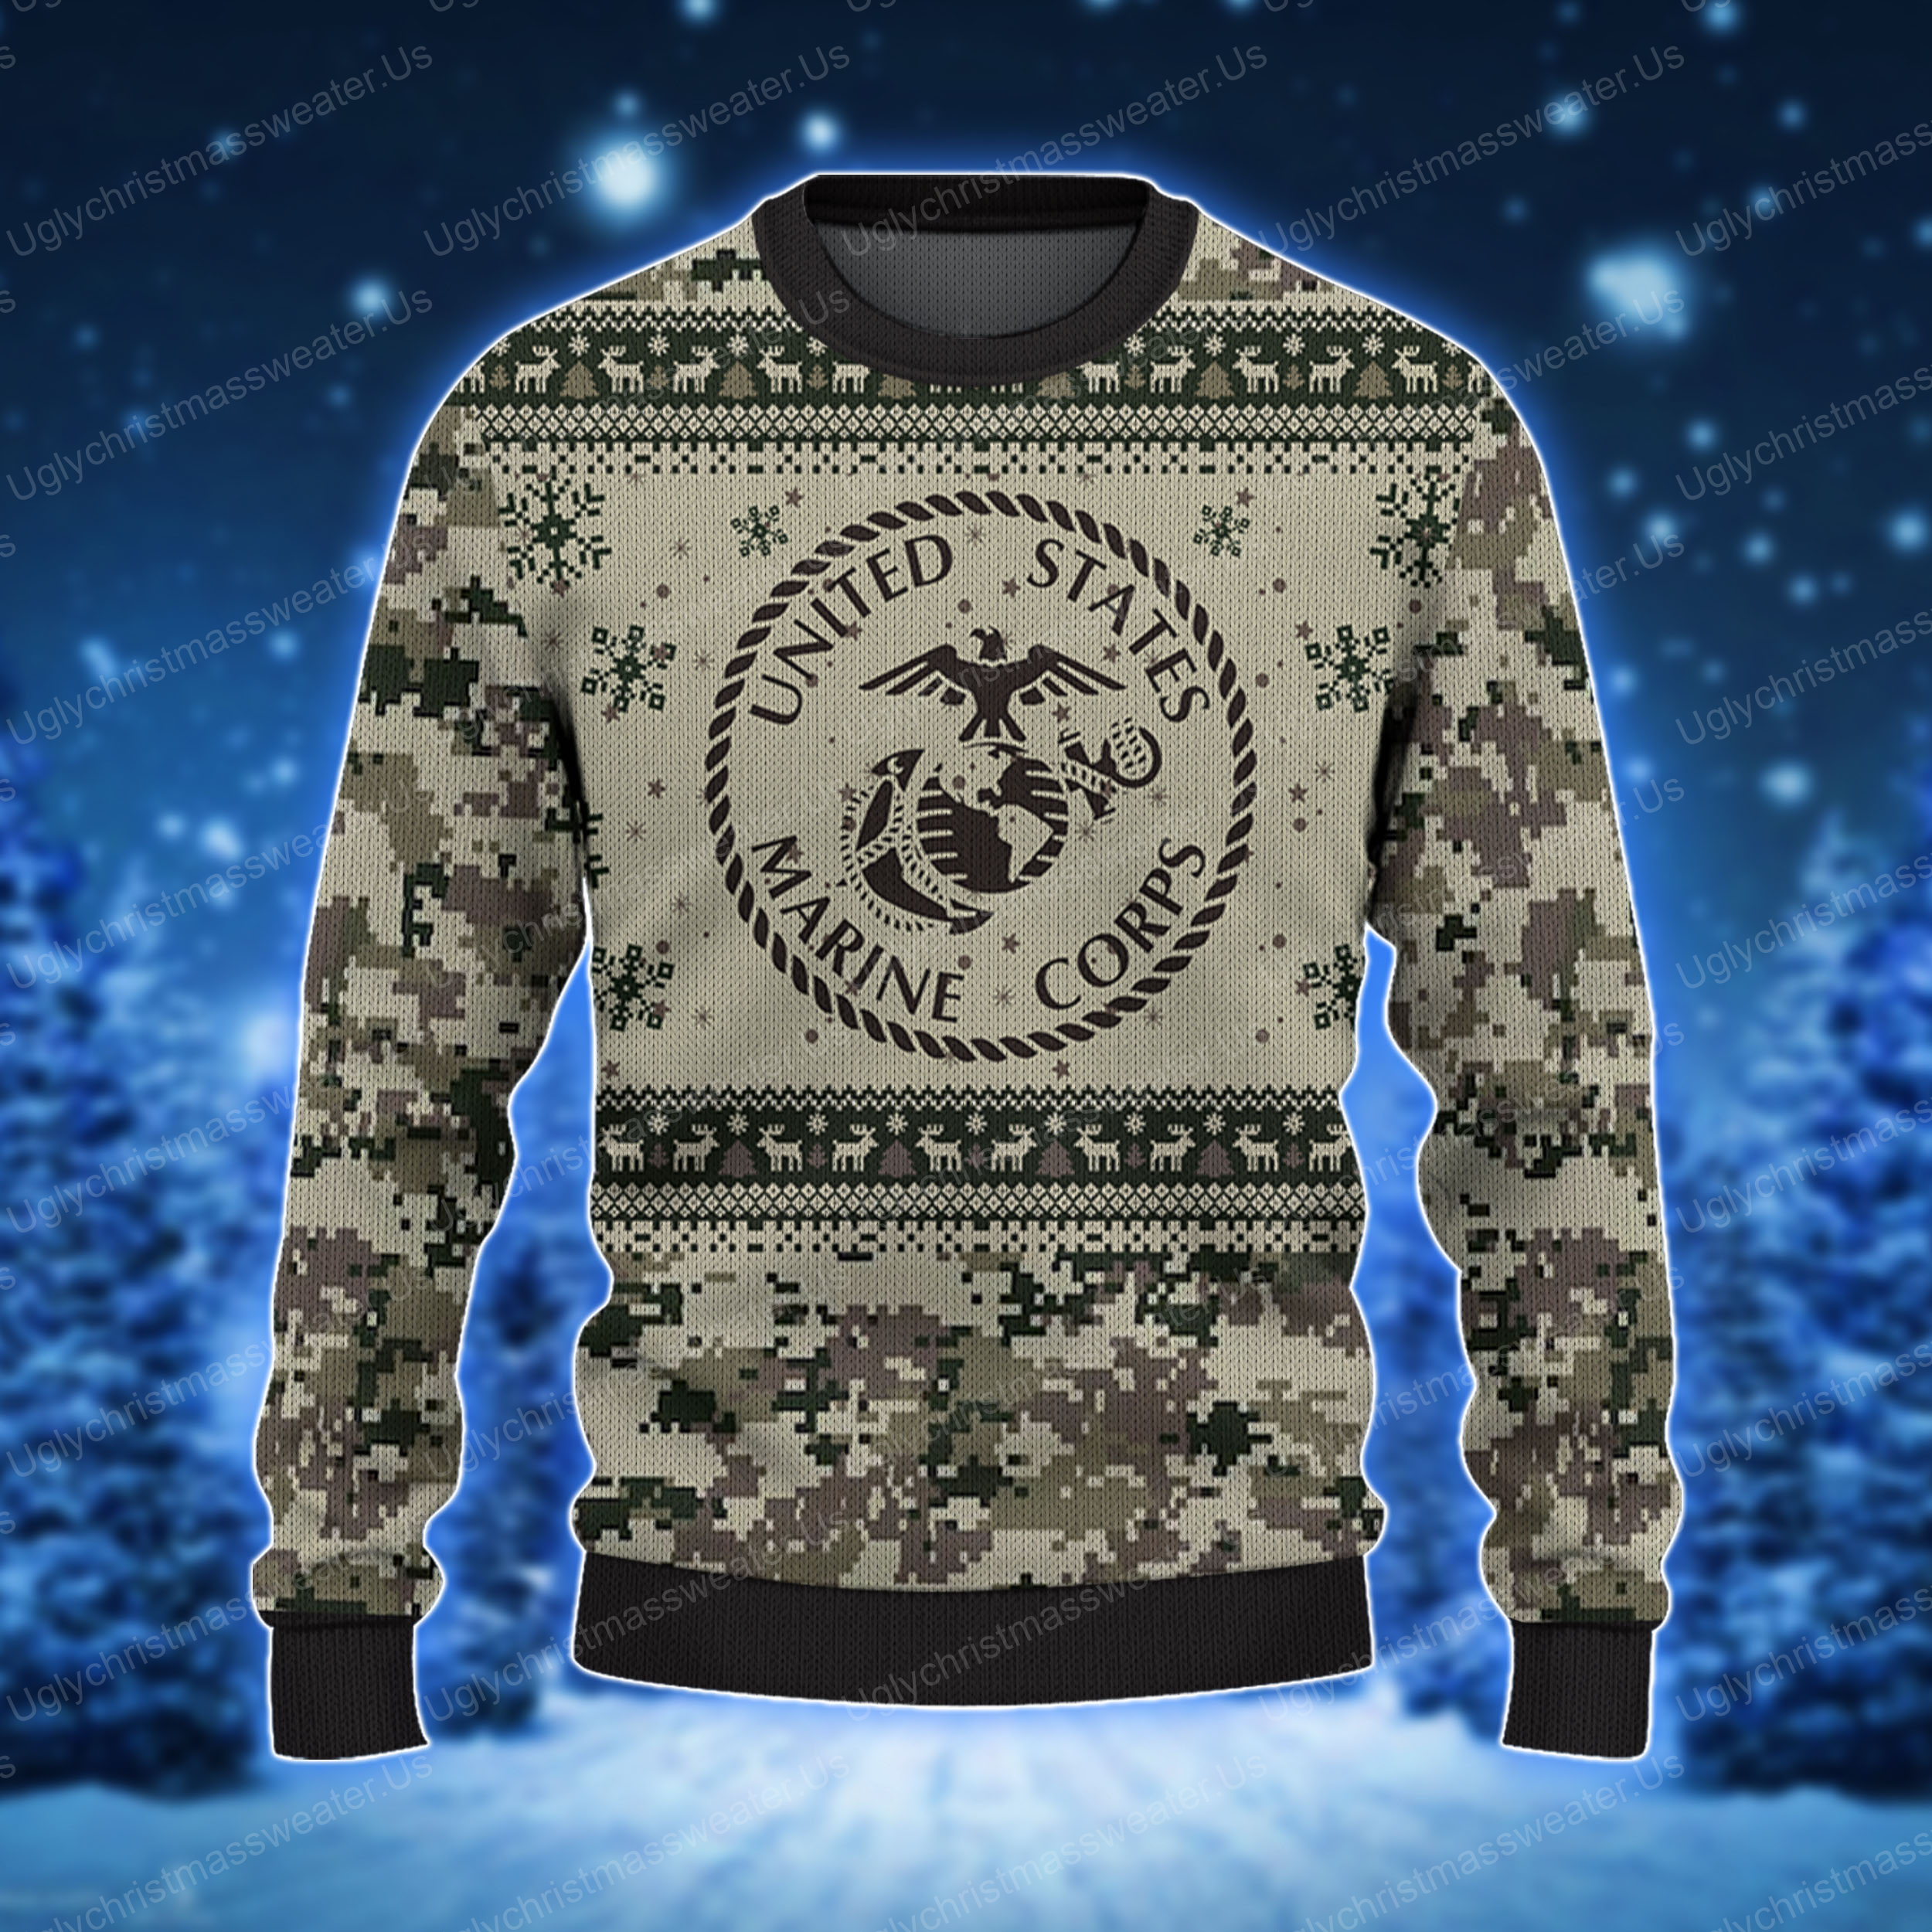 Fashion Flair, Patriotism Wear: Our Marine Corps Inspired Ugly Christmas Camo Sweater